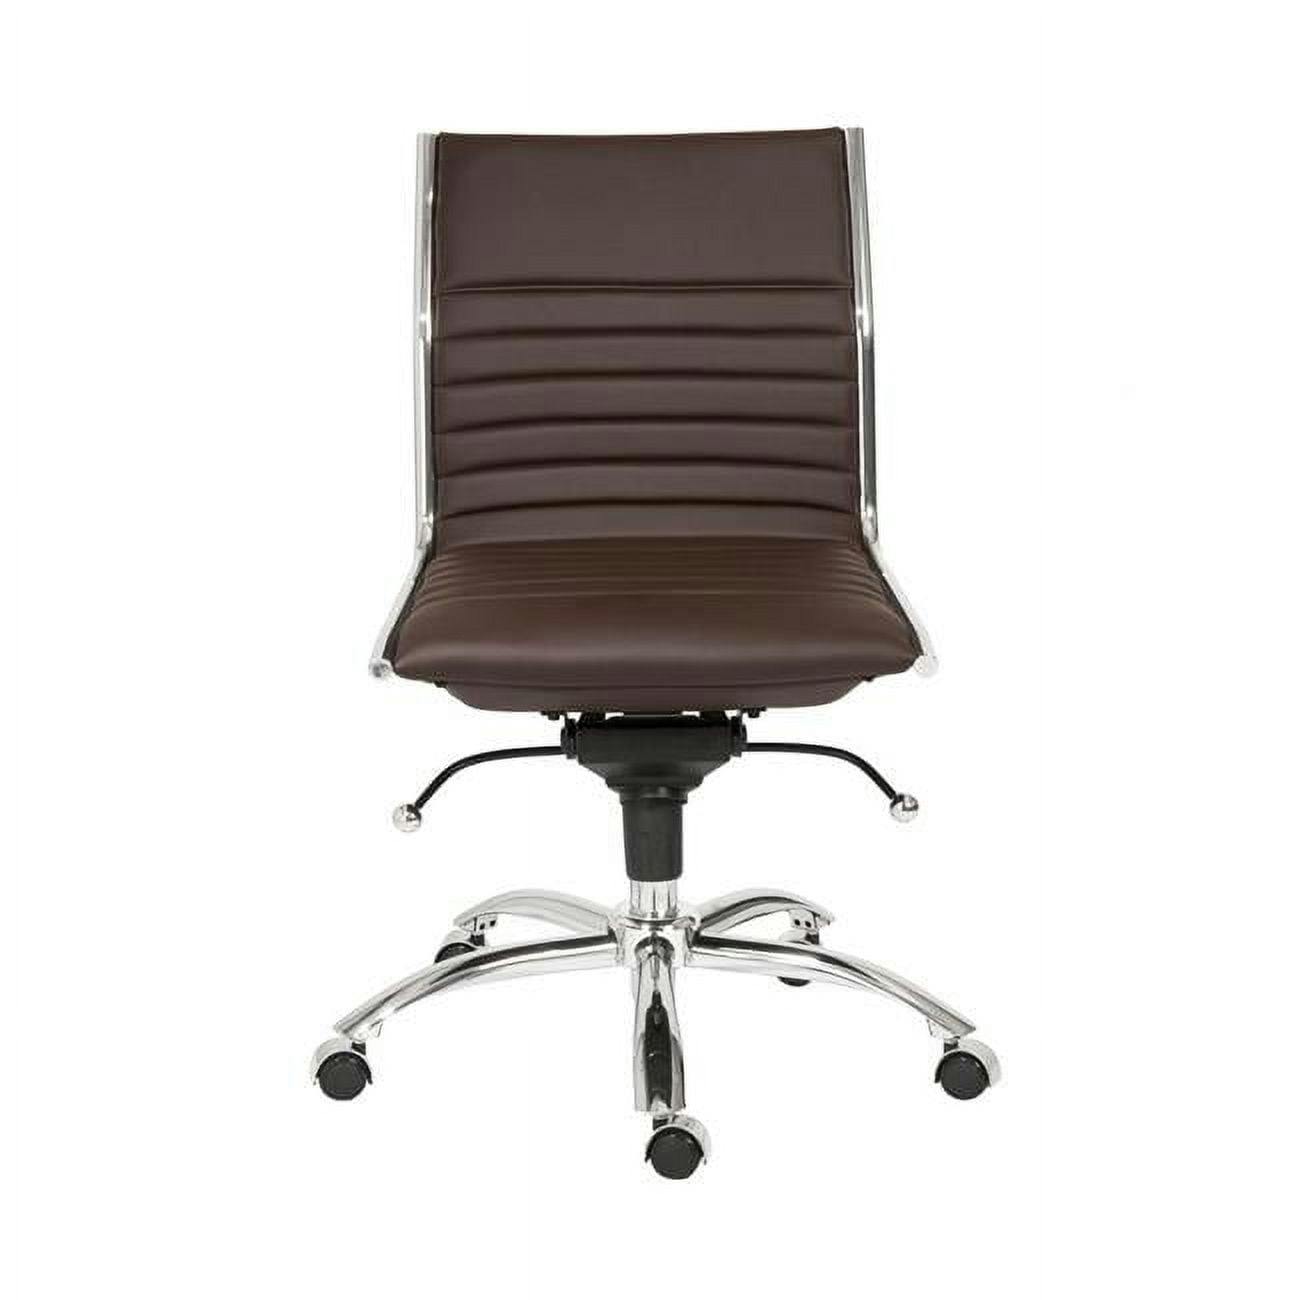 Adjustable Swivel Bungee Office Chair in Brown Faux Leather with Metal Base